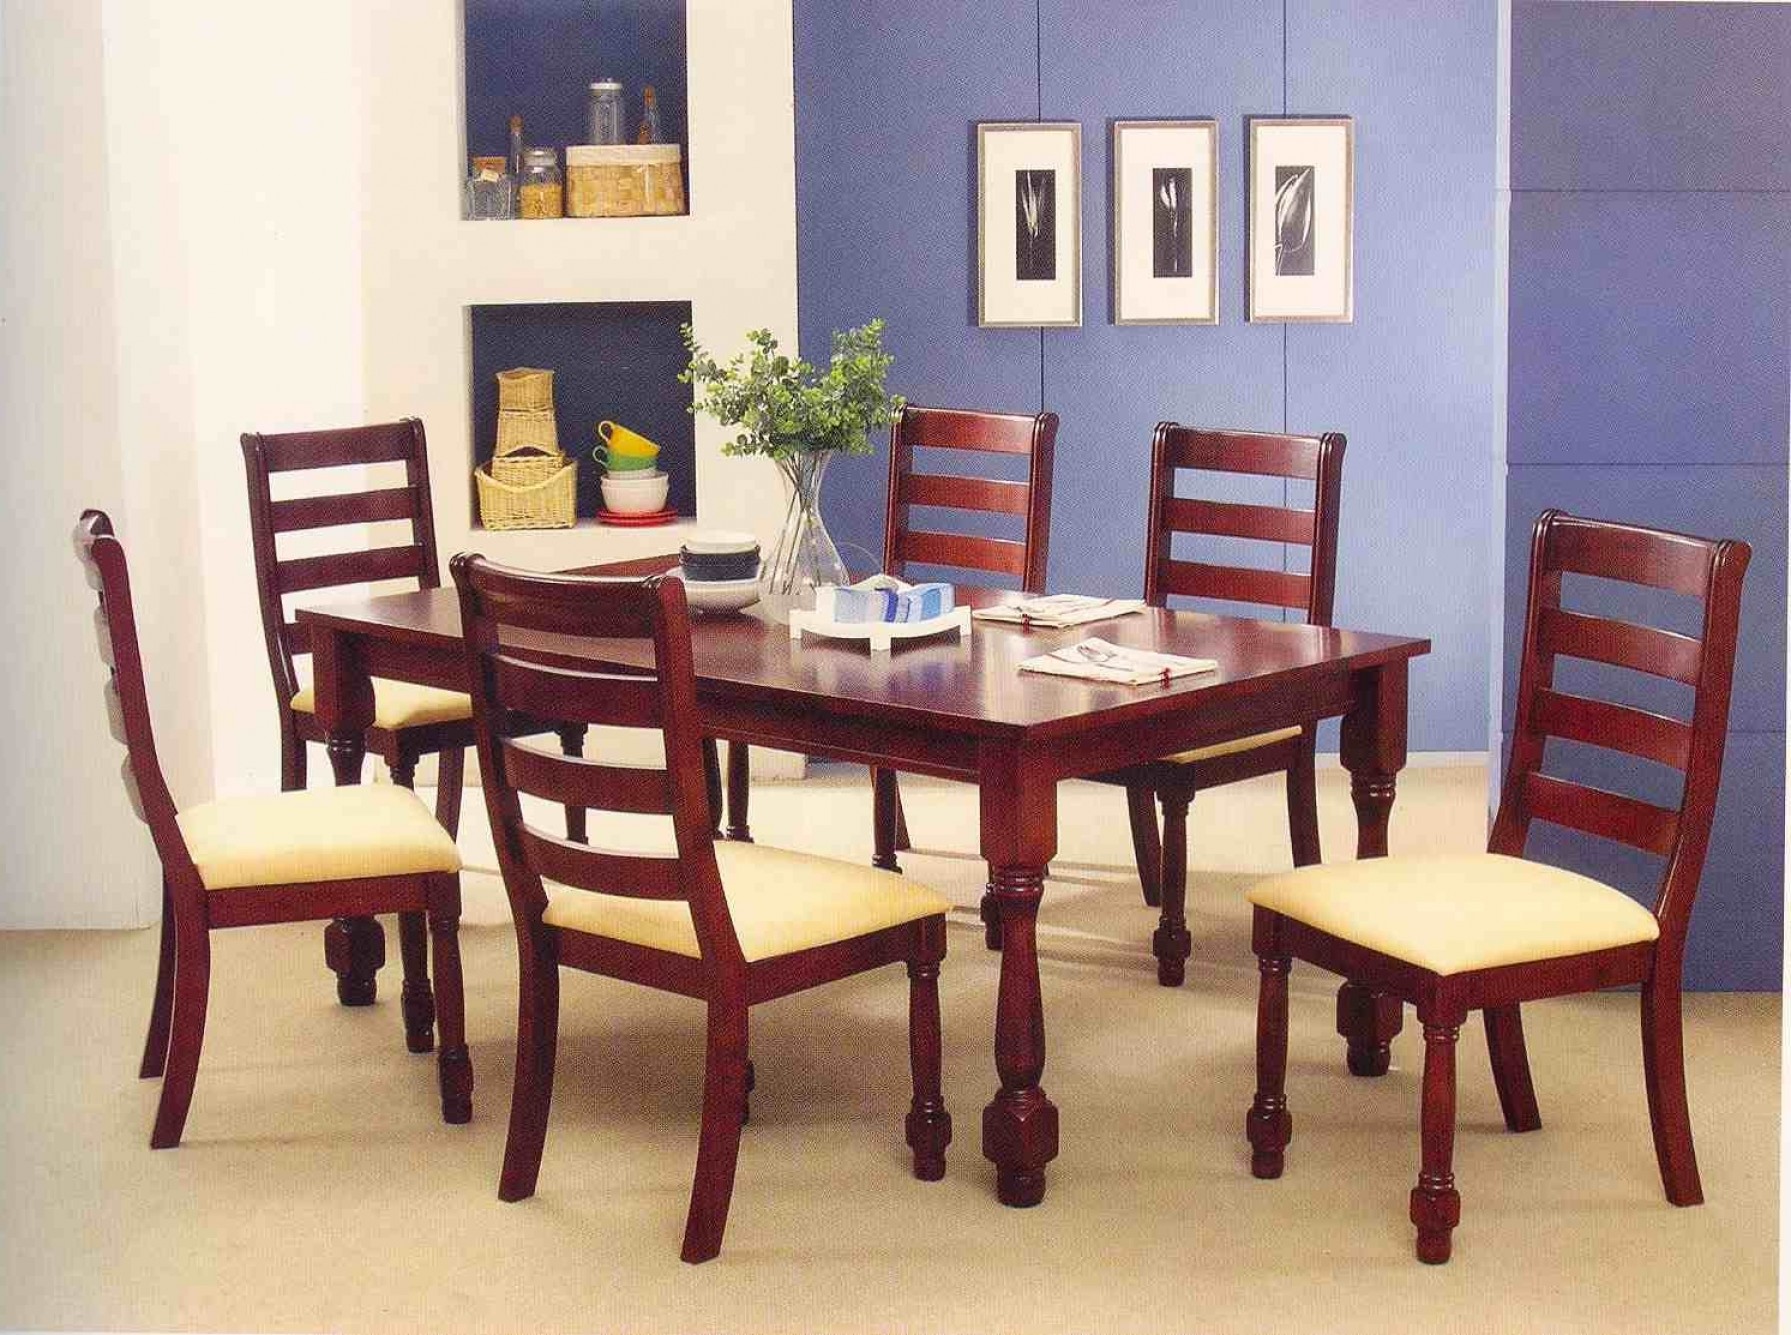 Free Dining Room Cliparts, Download Free Clip Art, Free Clip